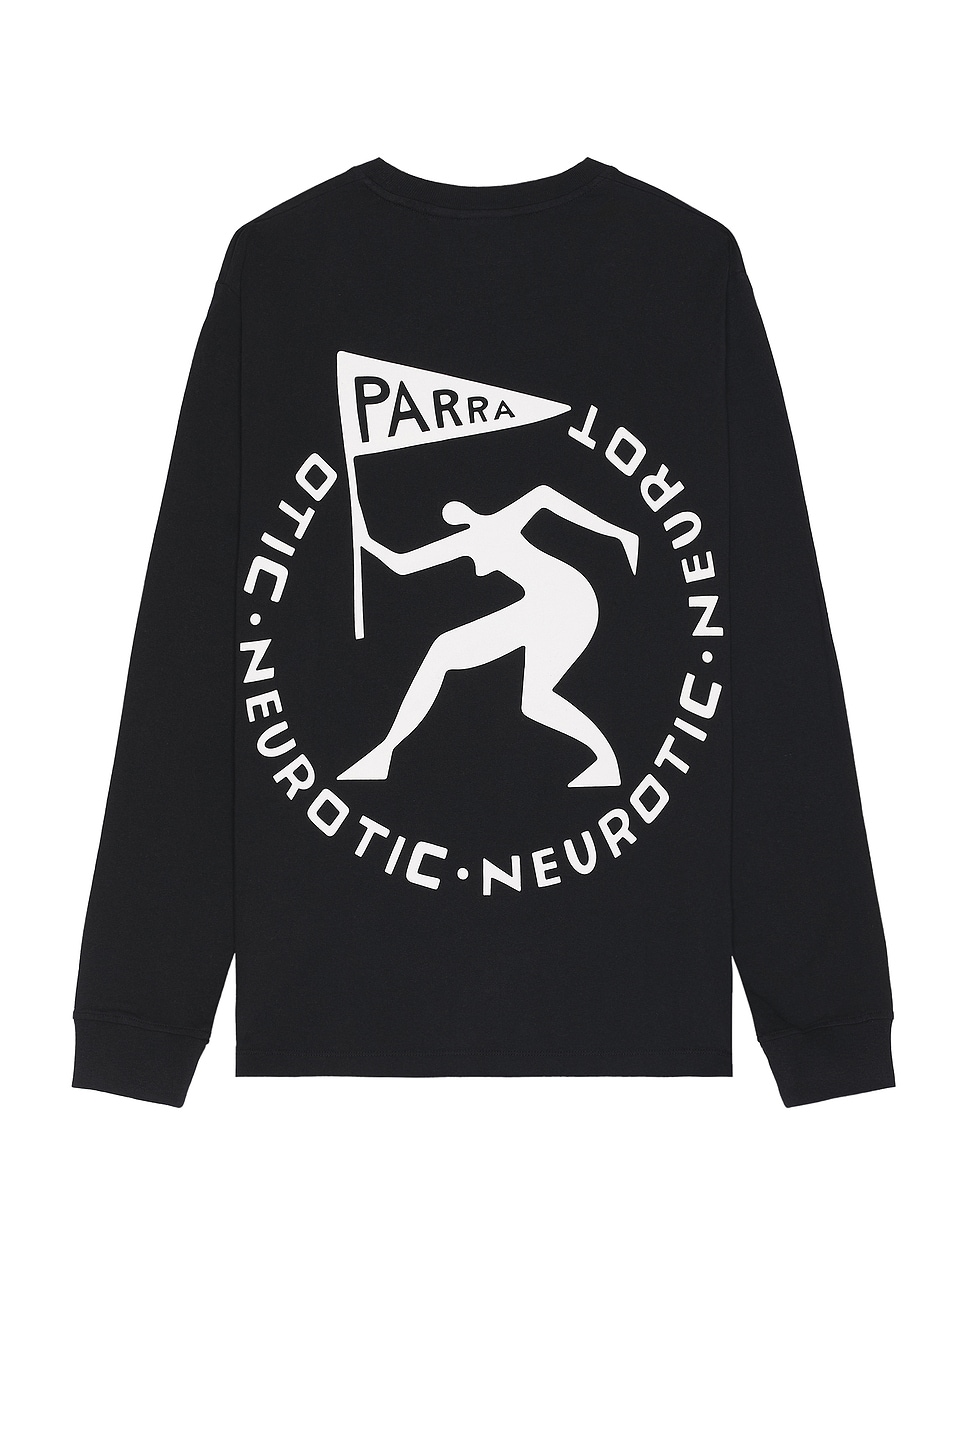 Image 1 of By Parra Neurotic Flag Long Sleeve T-shirt in Black